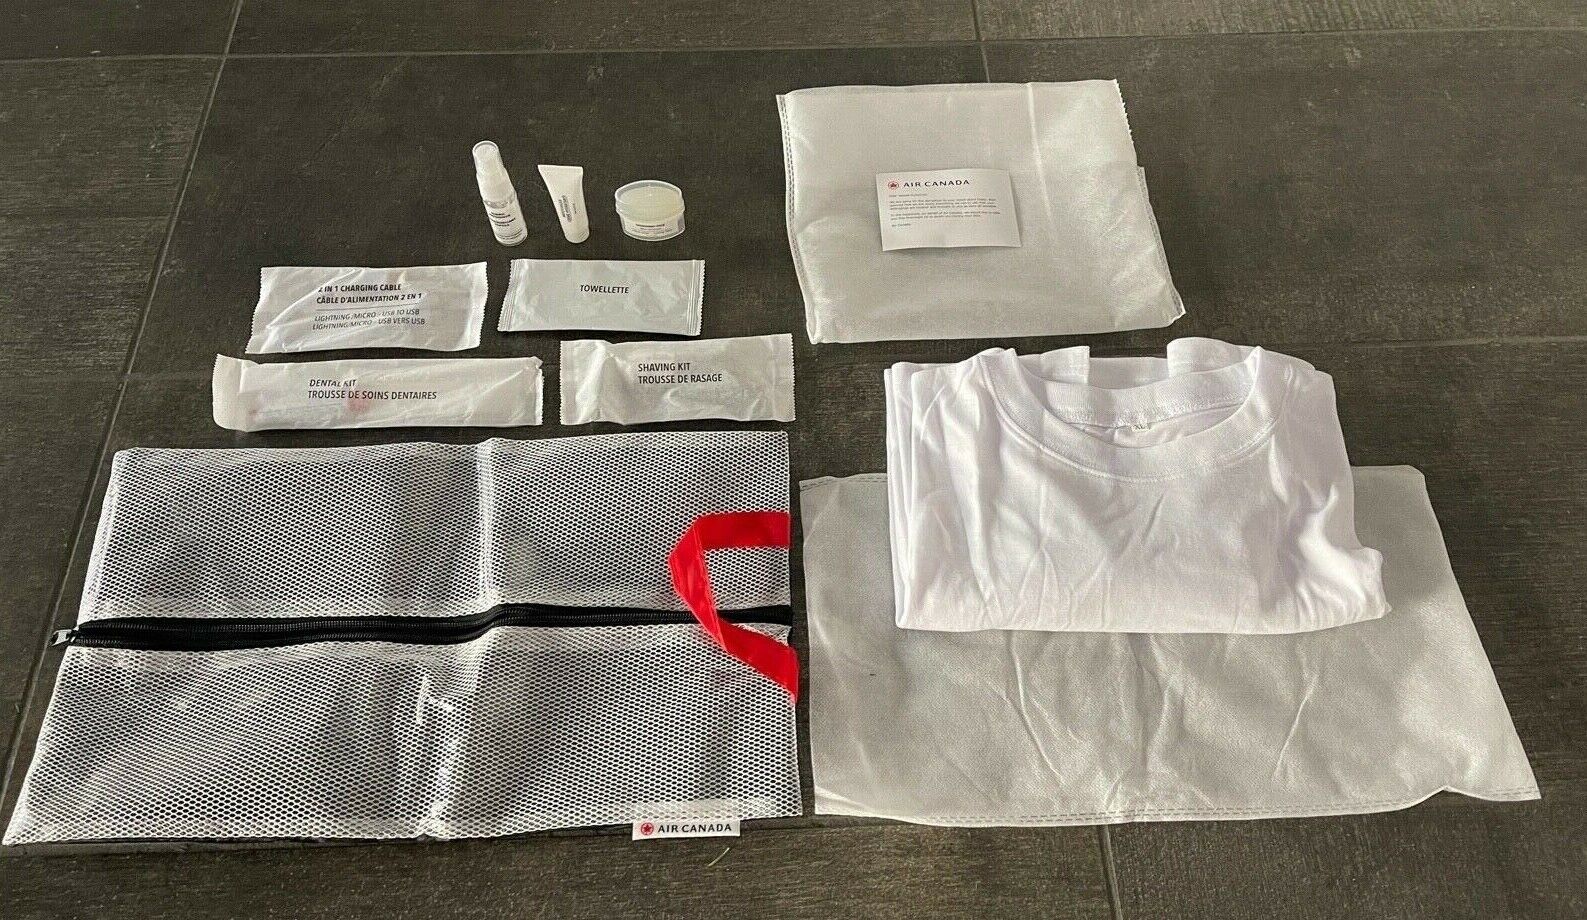 Air Canada Lost Delayed Baggage Overnight Hotel Stay Amenity Kit Deluxe Version